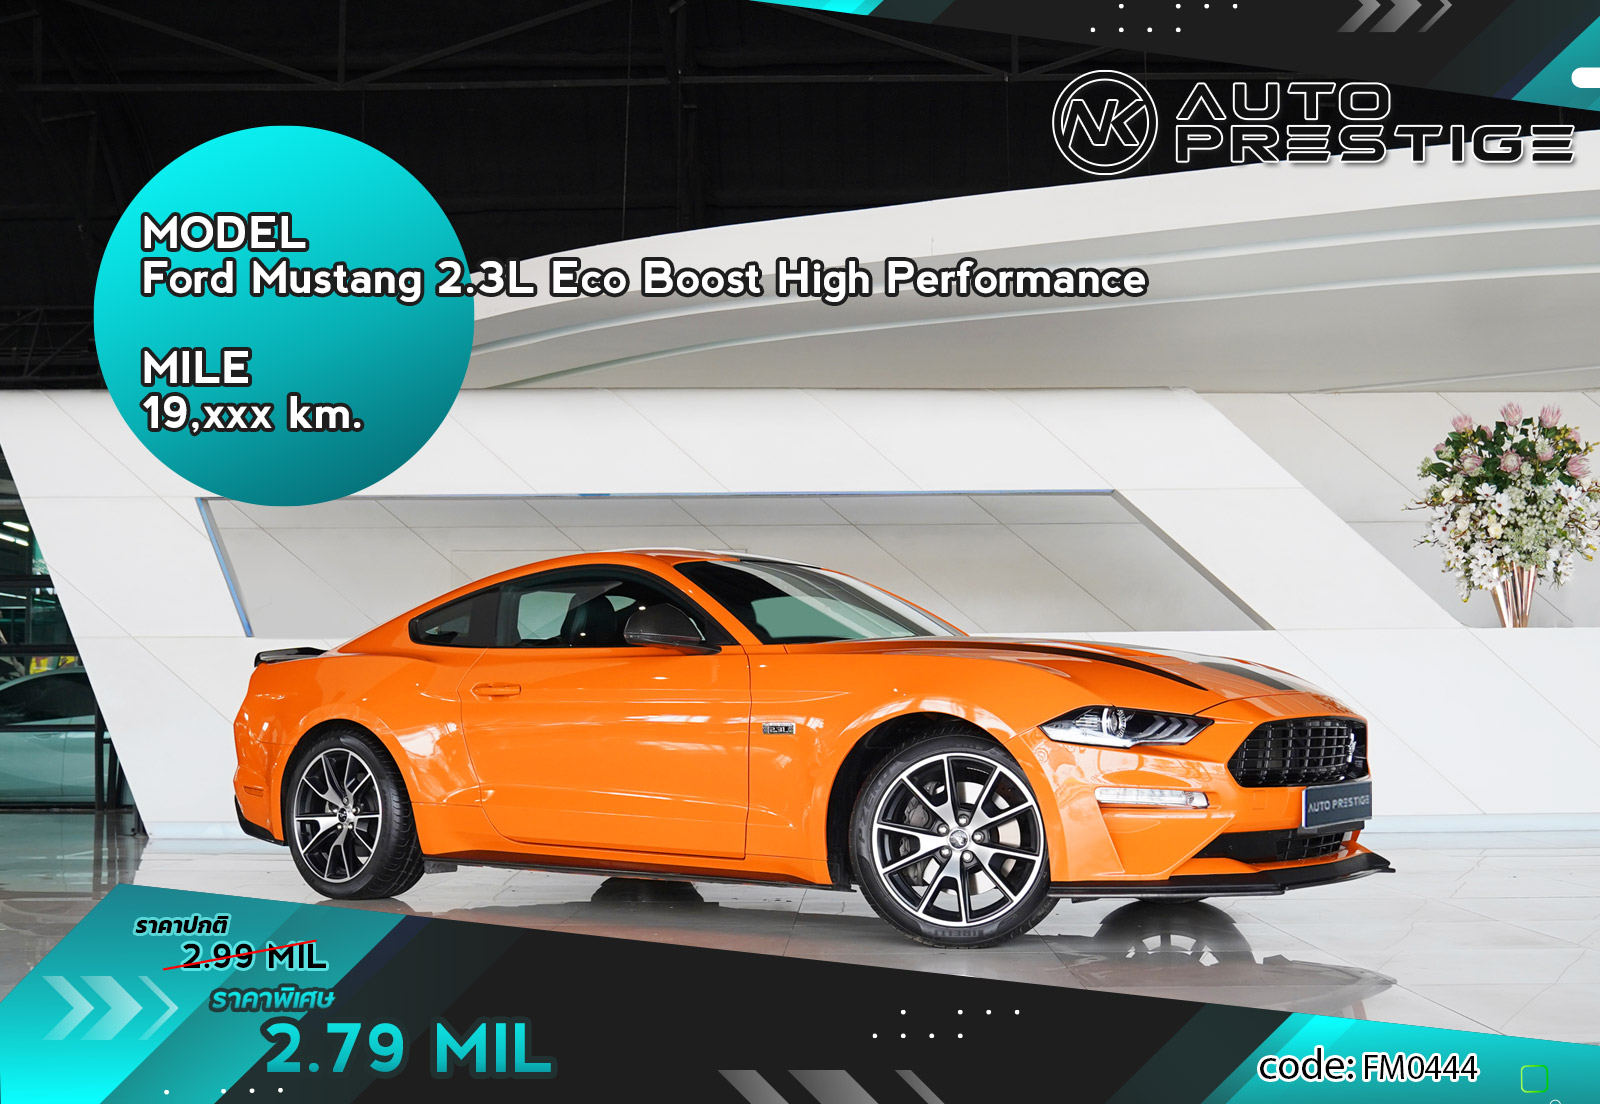 Ford Mustang 2.3L Eco Boost High Performance